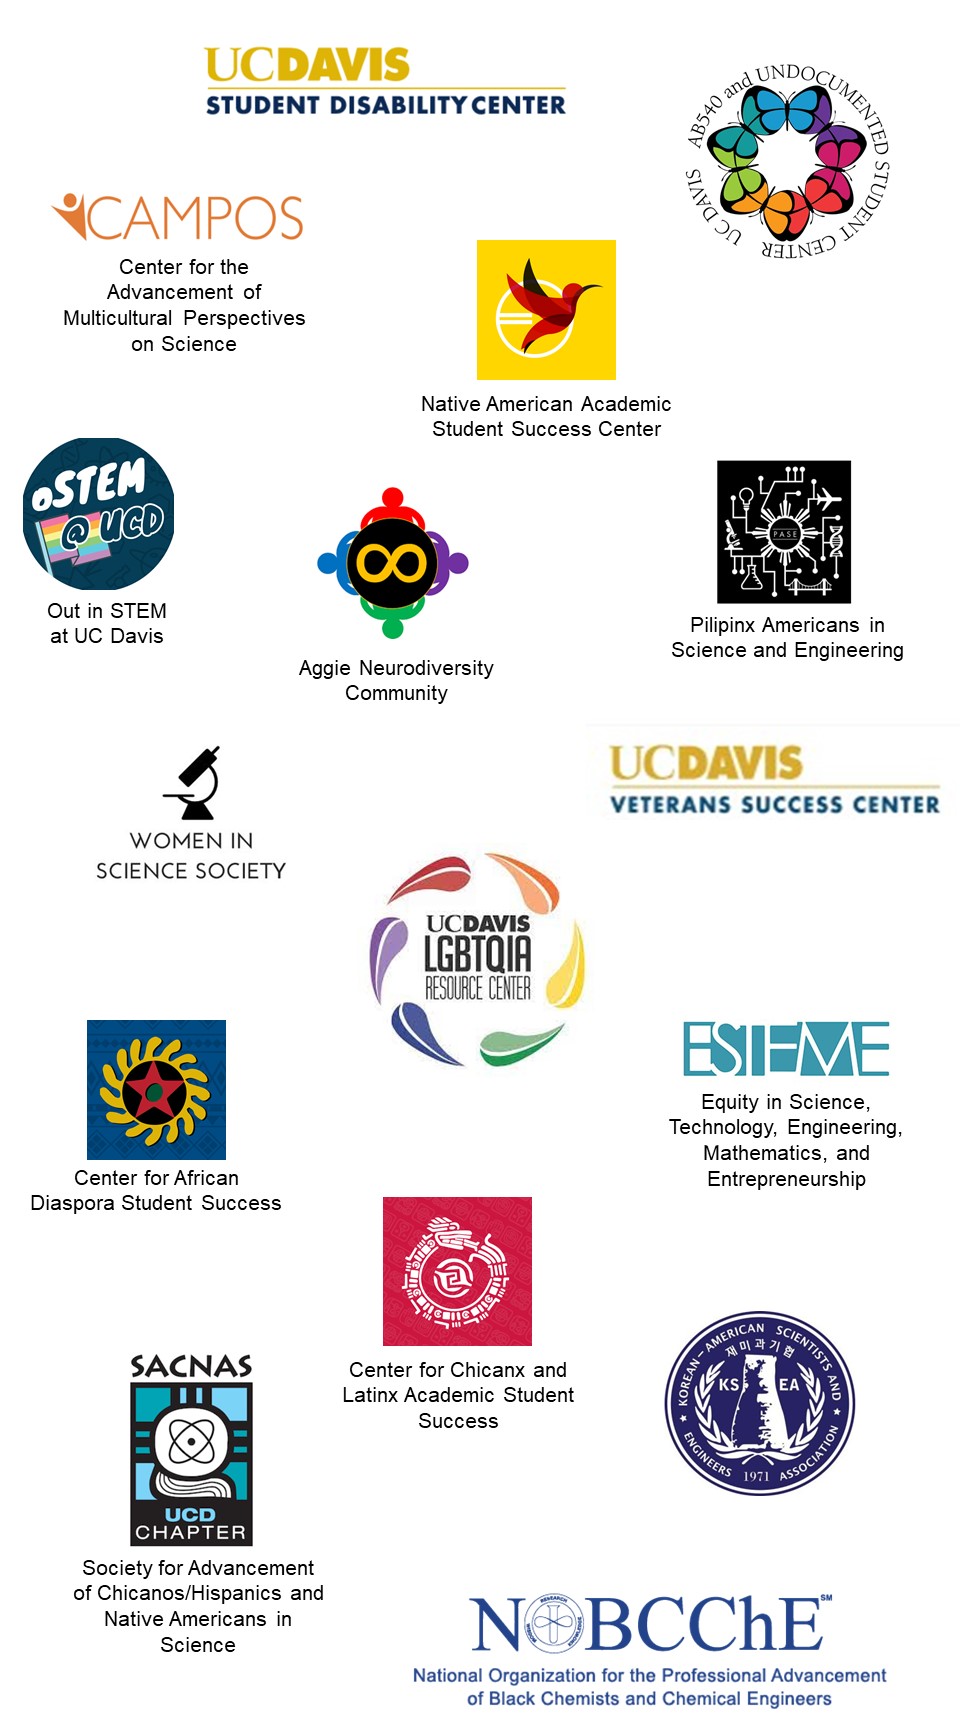 Logos from organizations at UC Davis that support individuals from historically underrepresented groups